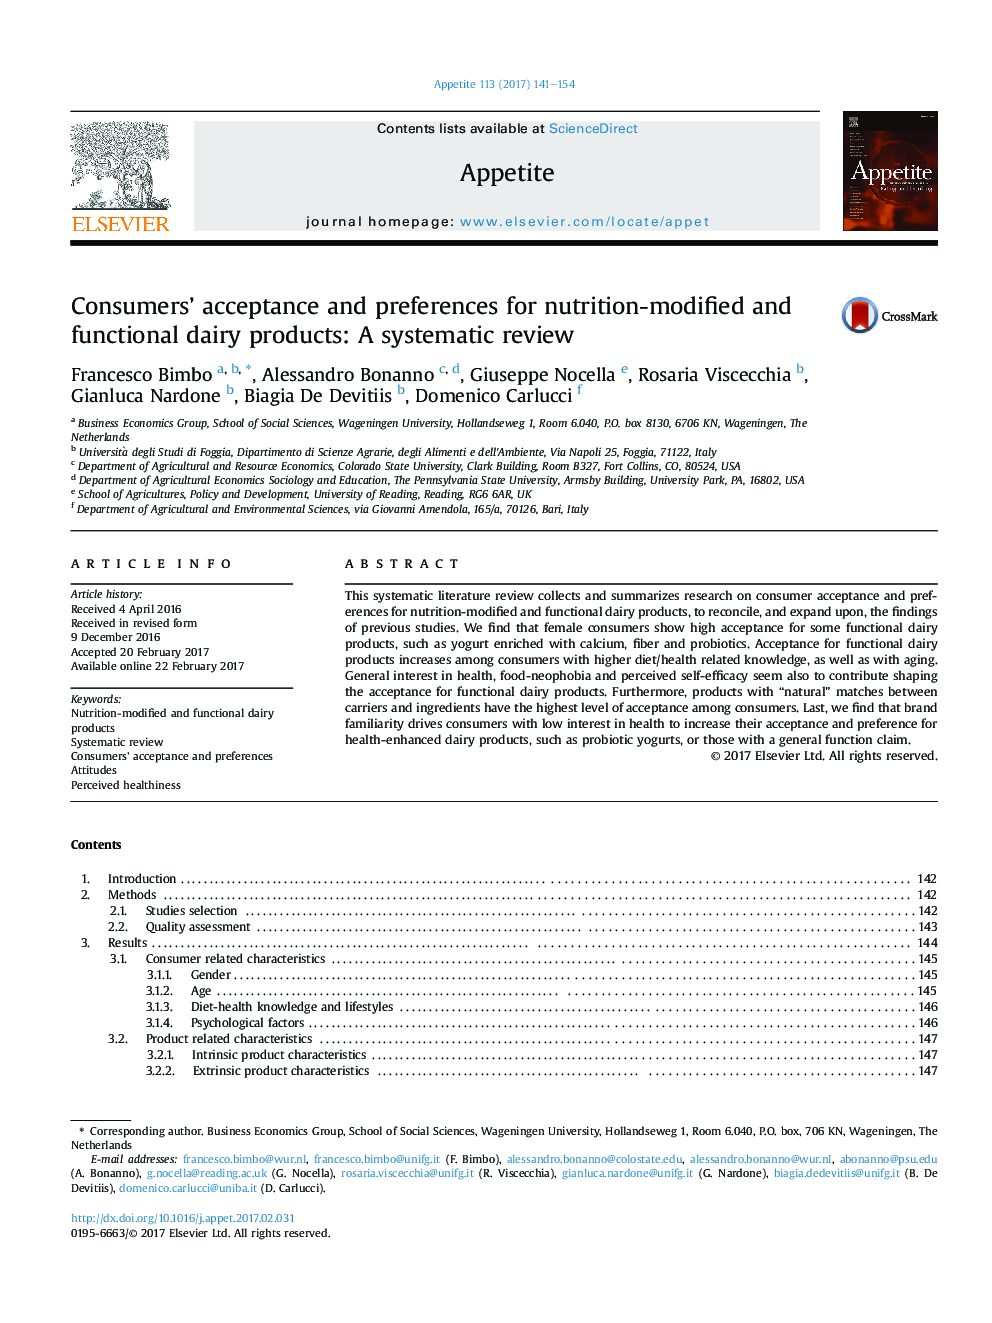 Consumers' acceptance and preferences for nutrition-modified and functional dairy products: A systematic review